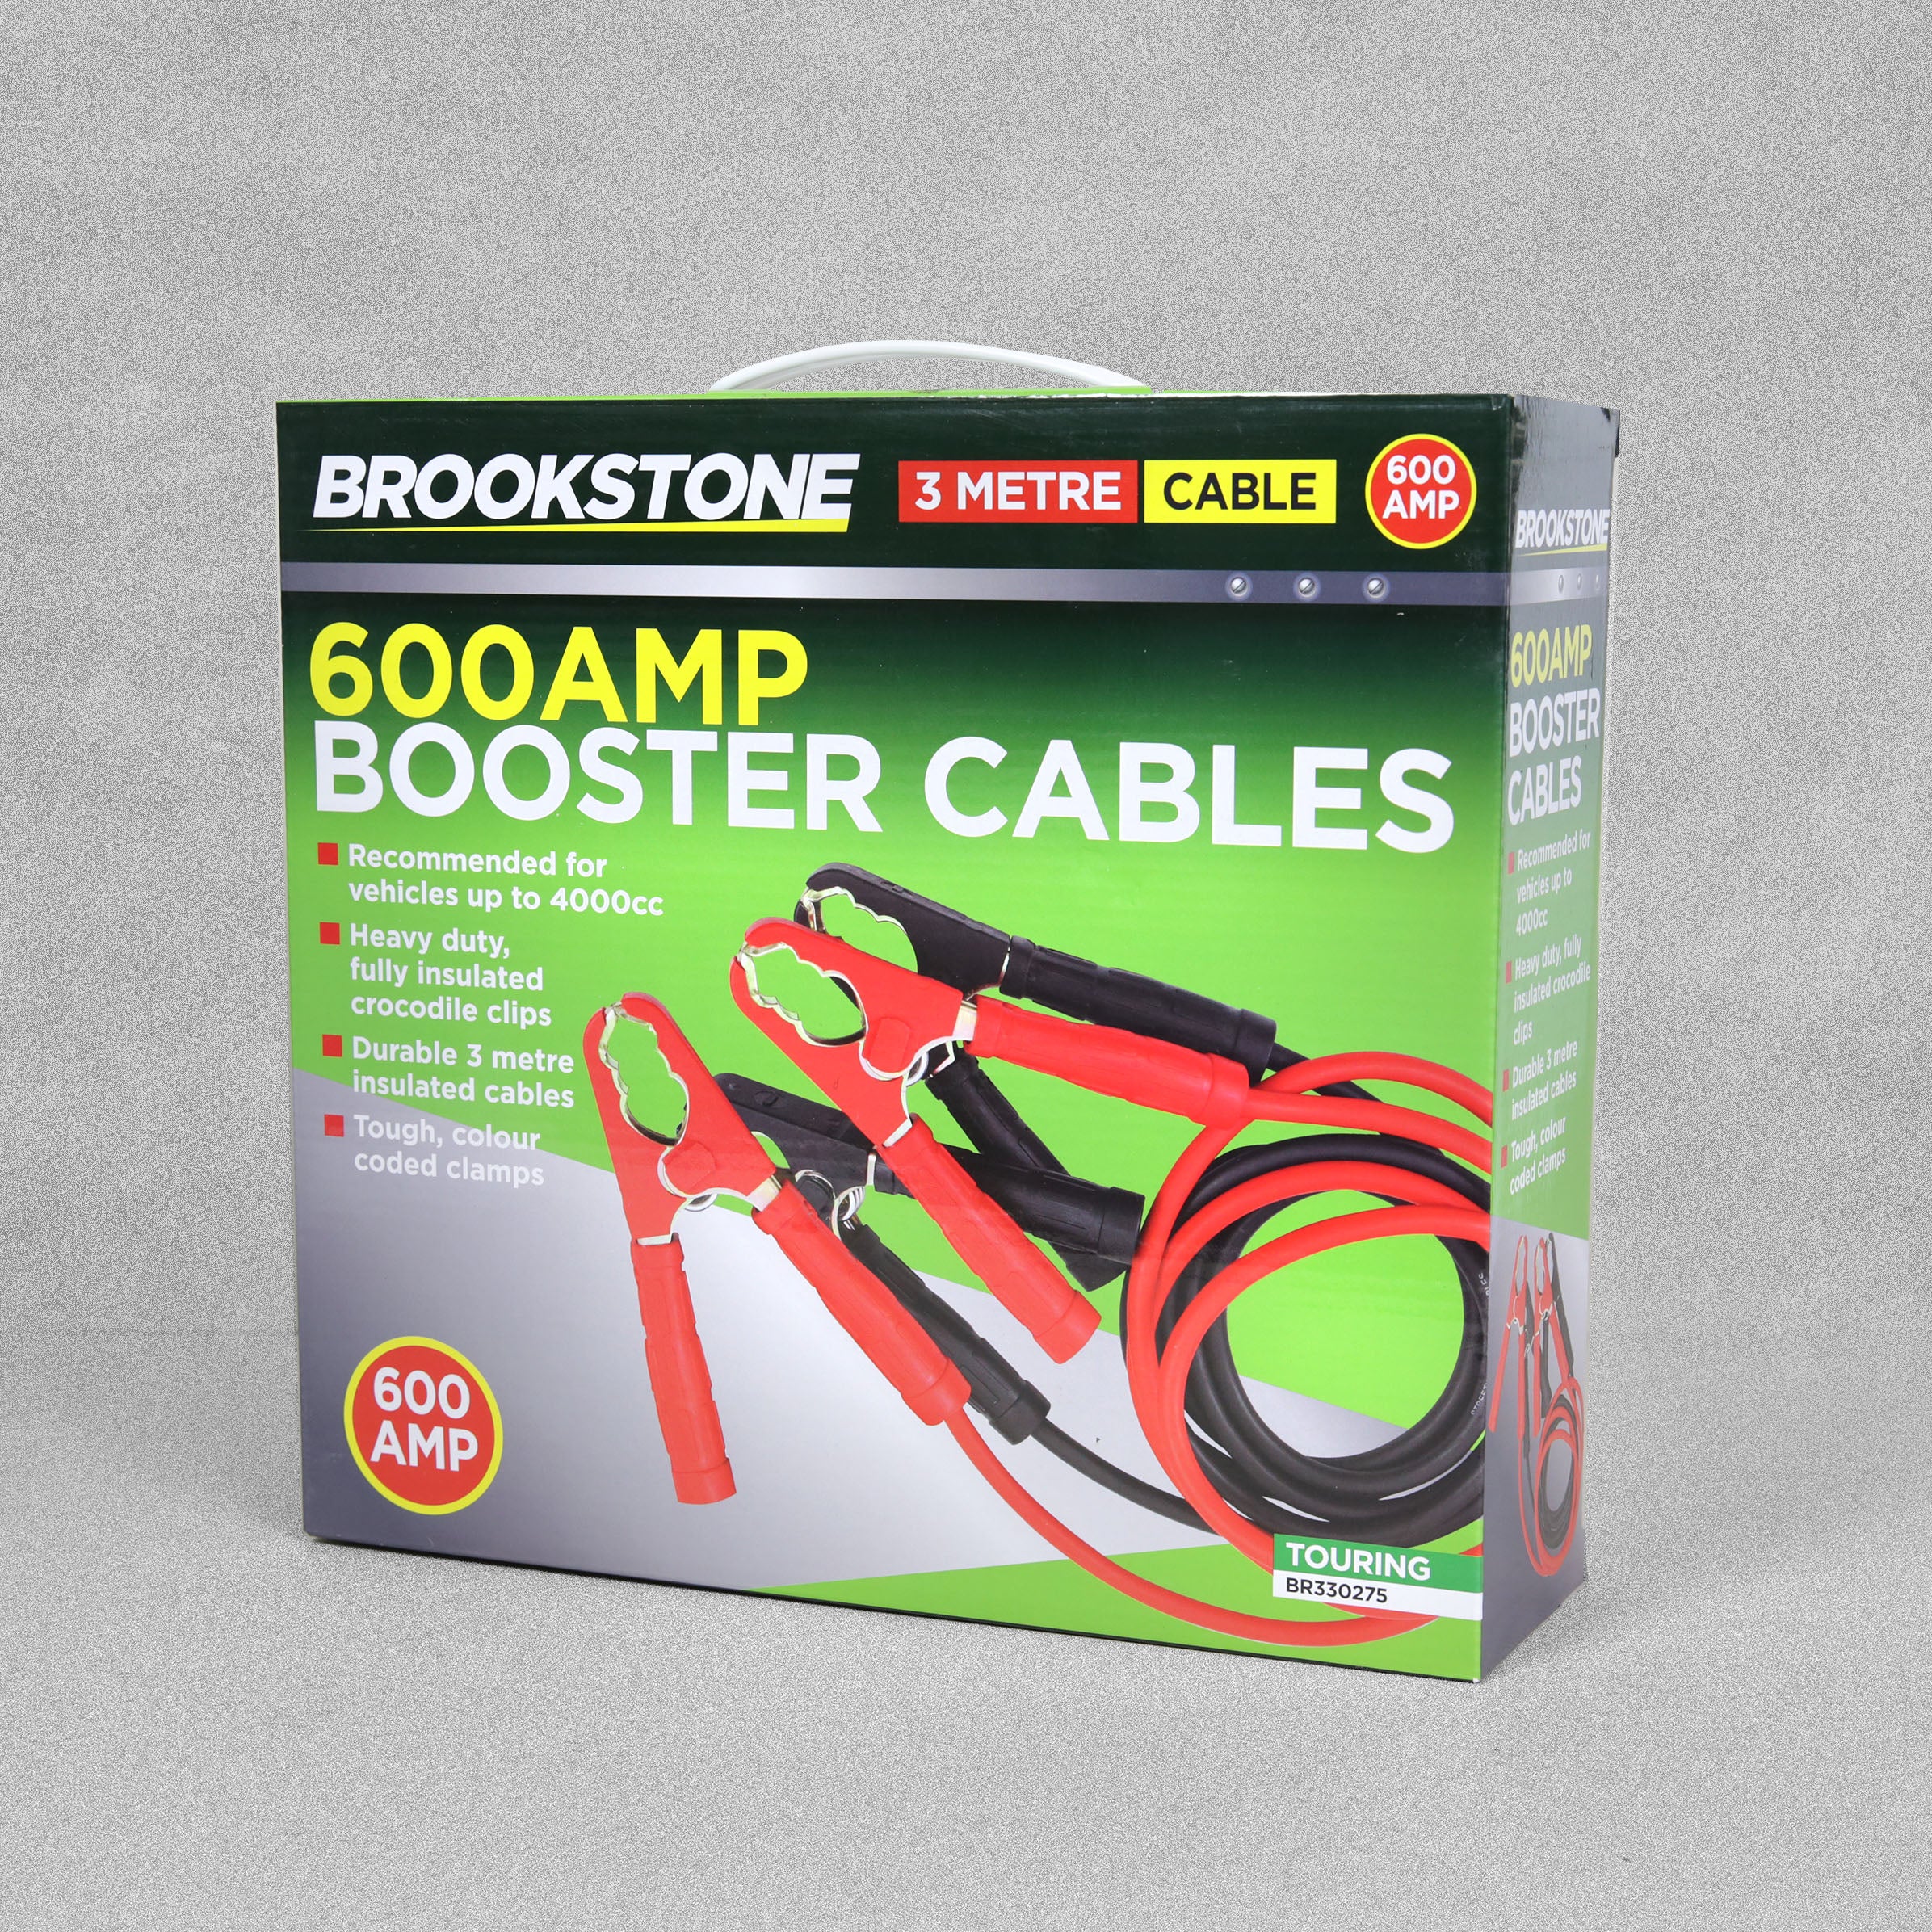 Brookstone 600 AMP Booster Cables (Jump Leads) - 3 Metre